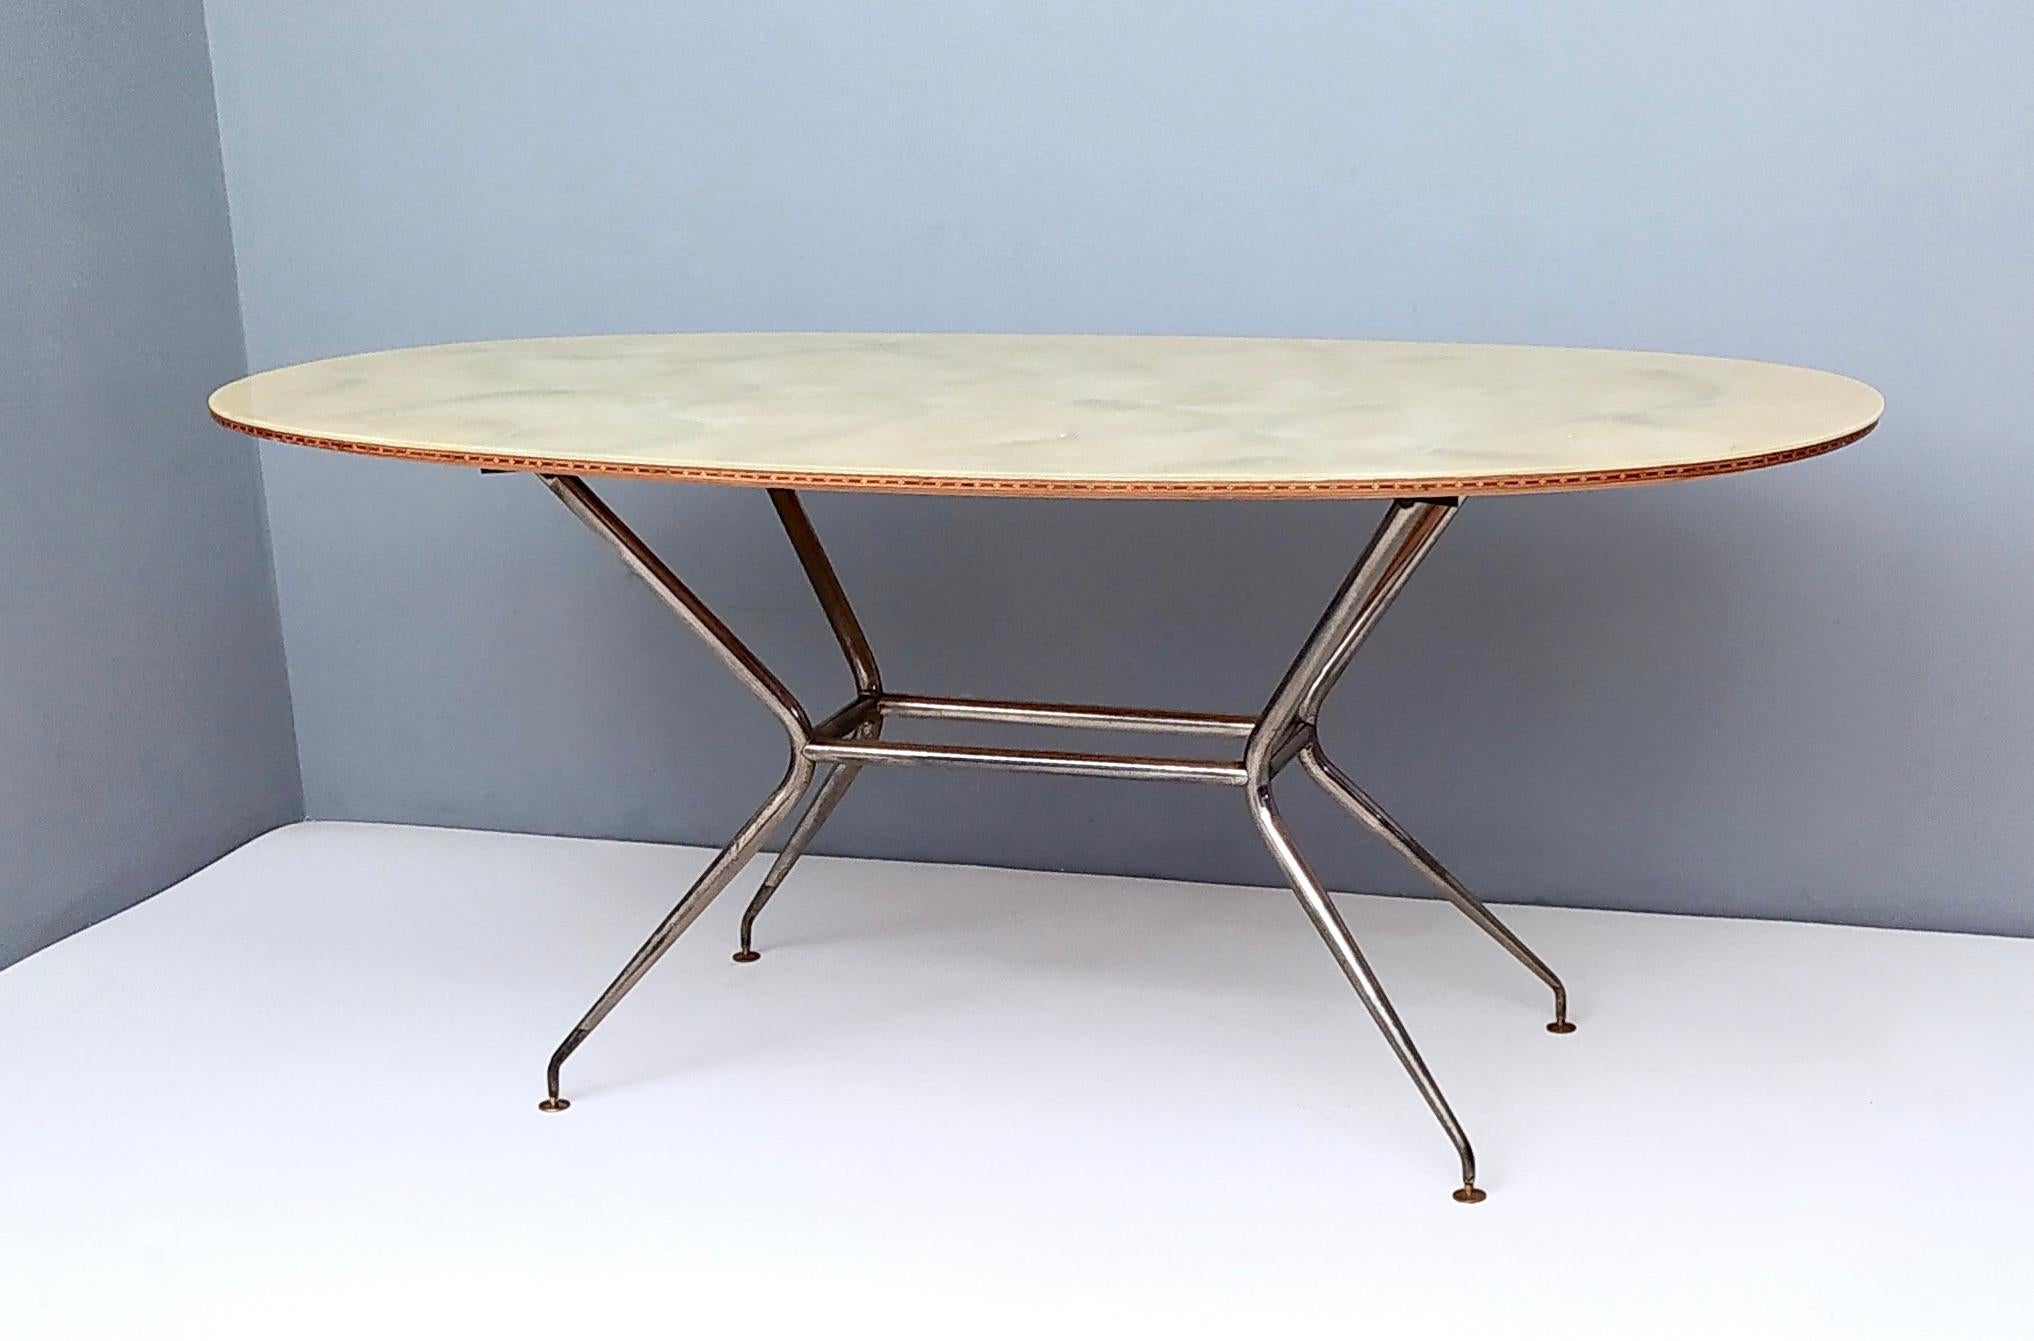 Plated Vintage Wooden and Iron Dining Table with an Oval Glass Top, Italy